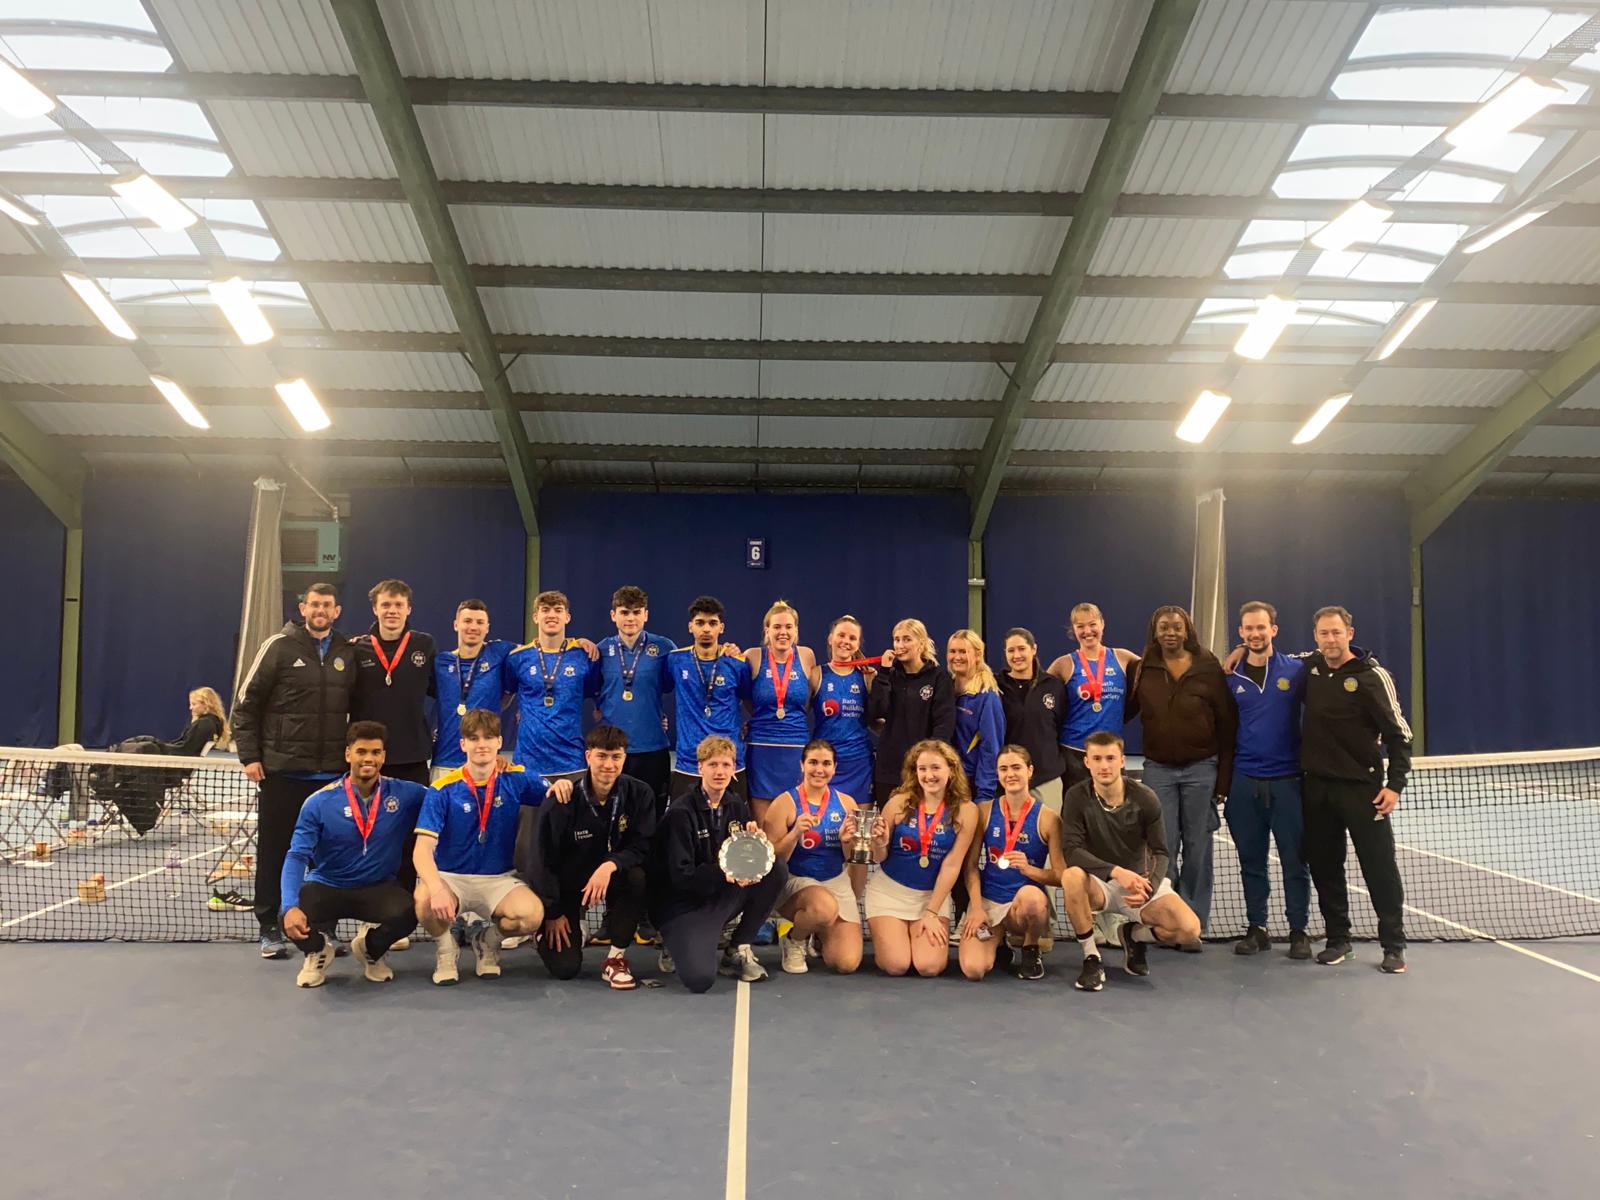 The University of Bath student tennis teams won two gold medals and one silver at the 2023 BUCS Big Wednesday national finals